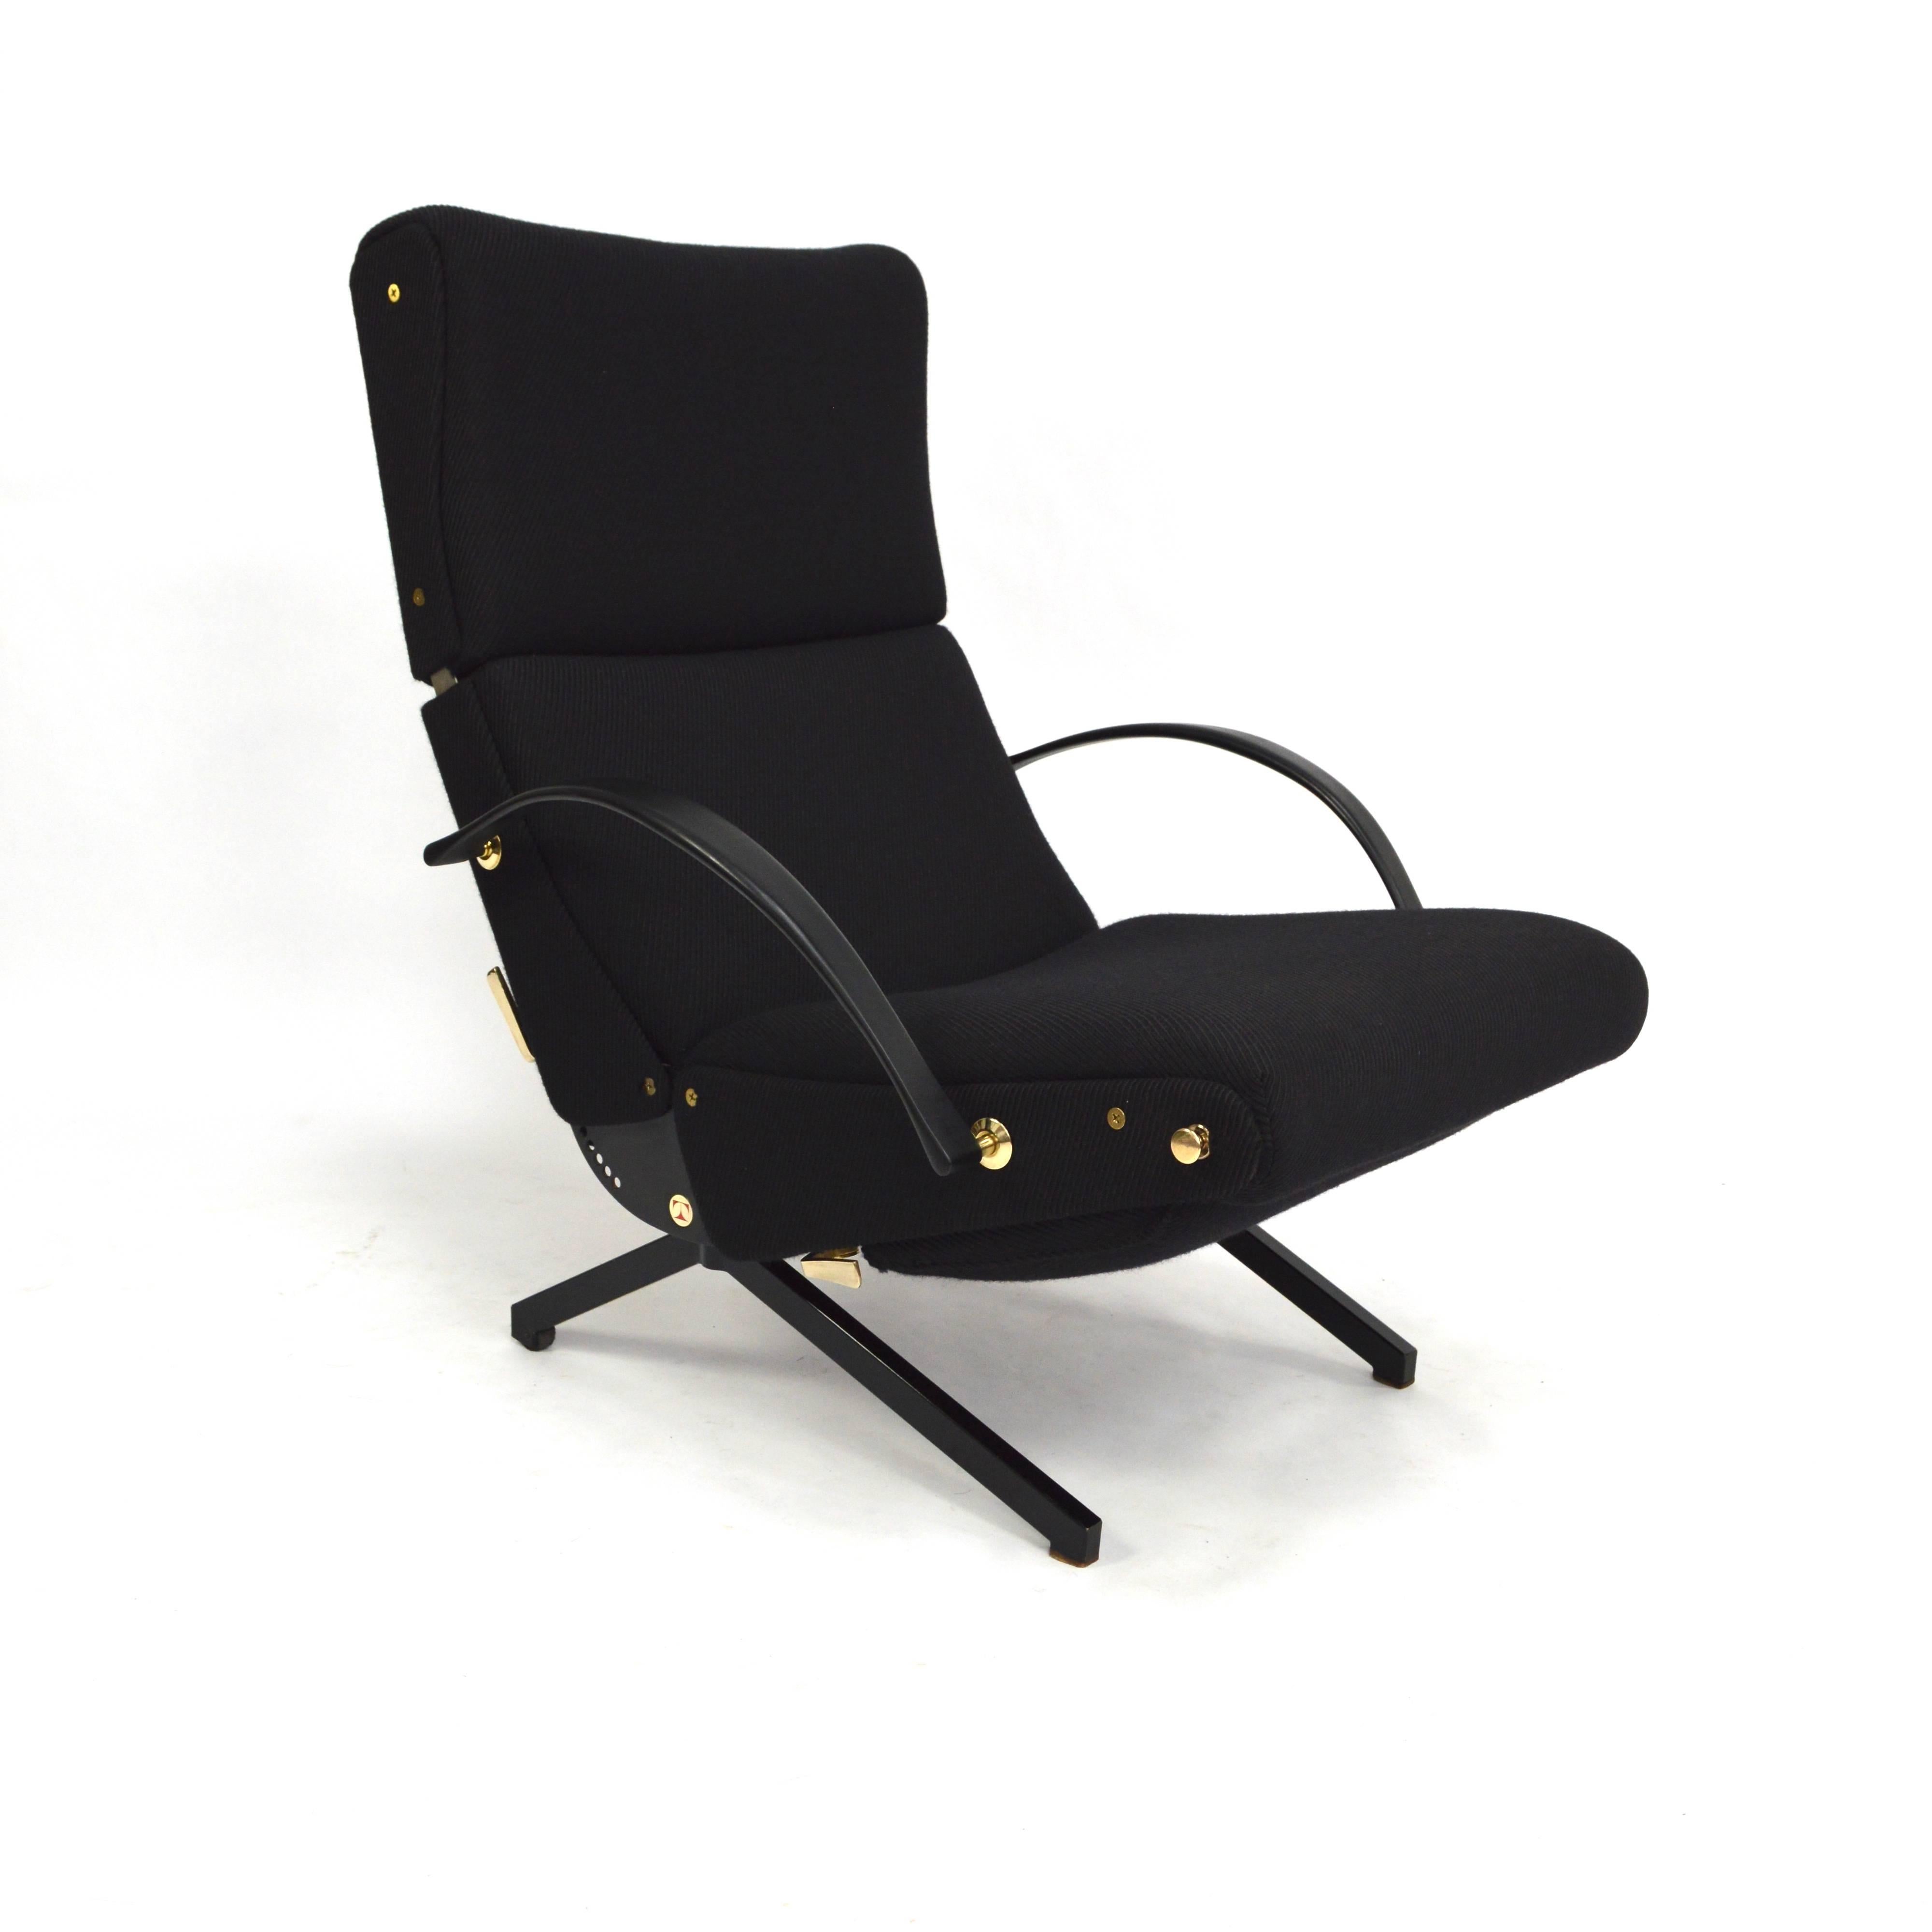 Stunning P40 chair by Osvaldo Borsani for Tecno.
This chair still has the original black diagonal black fabric, in museum quality condition. It also has the extendable headrest.

The chair is in excellent condition and all the mechanics for the